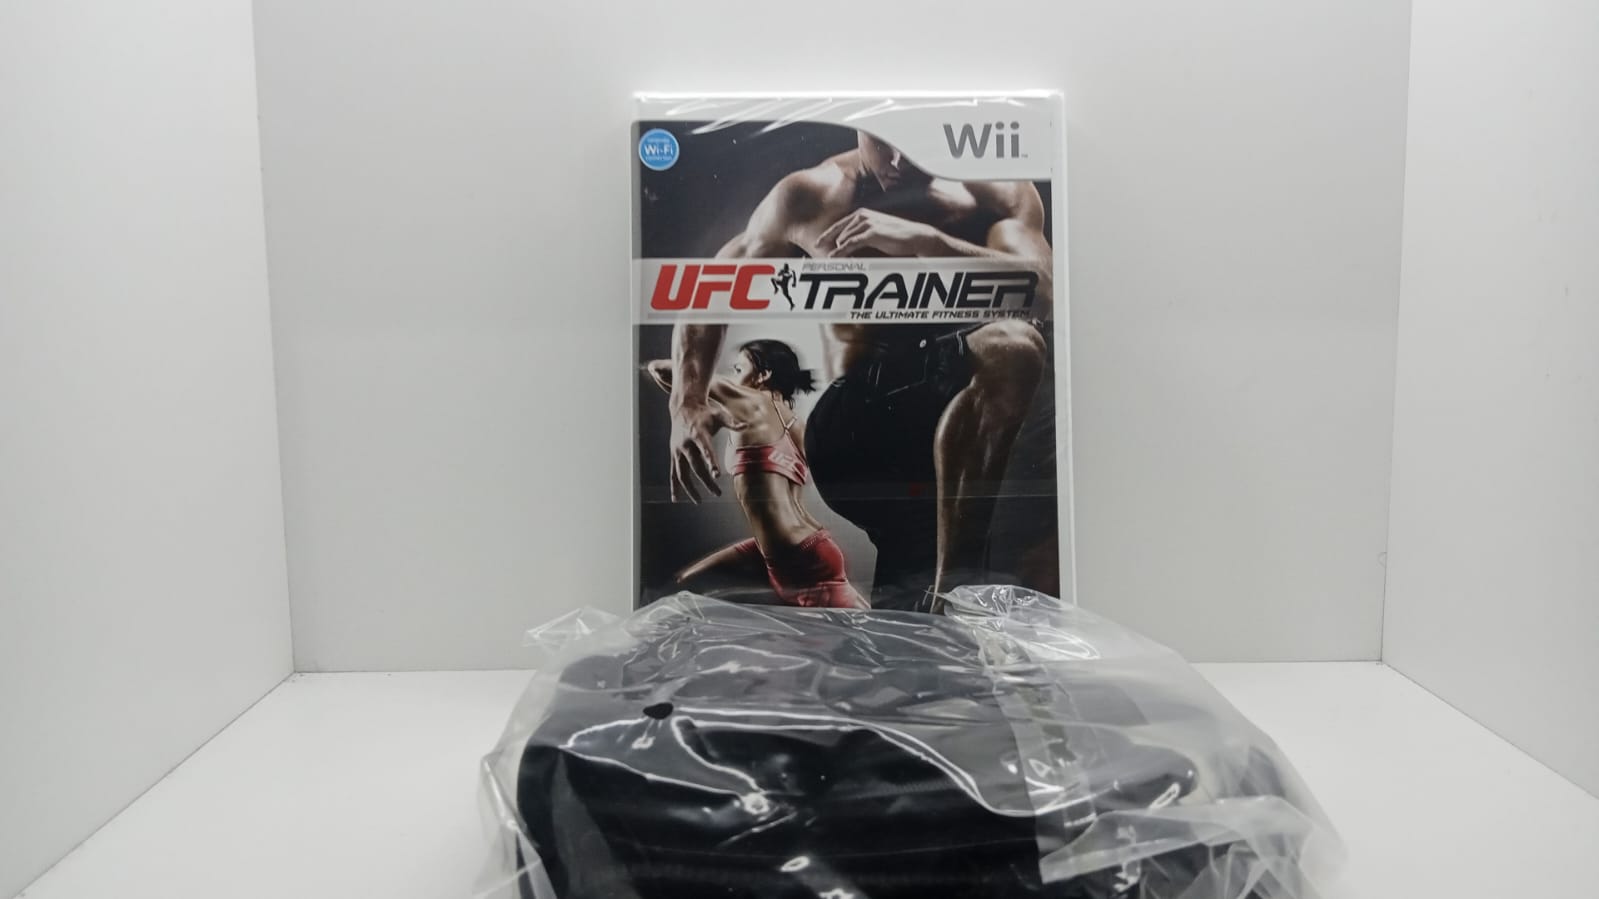 Leg Strap + UFC Personal Trainer The Ultimate Fitness System